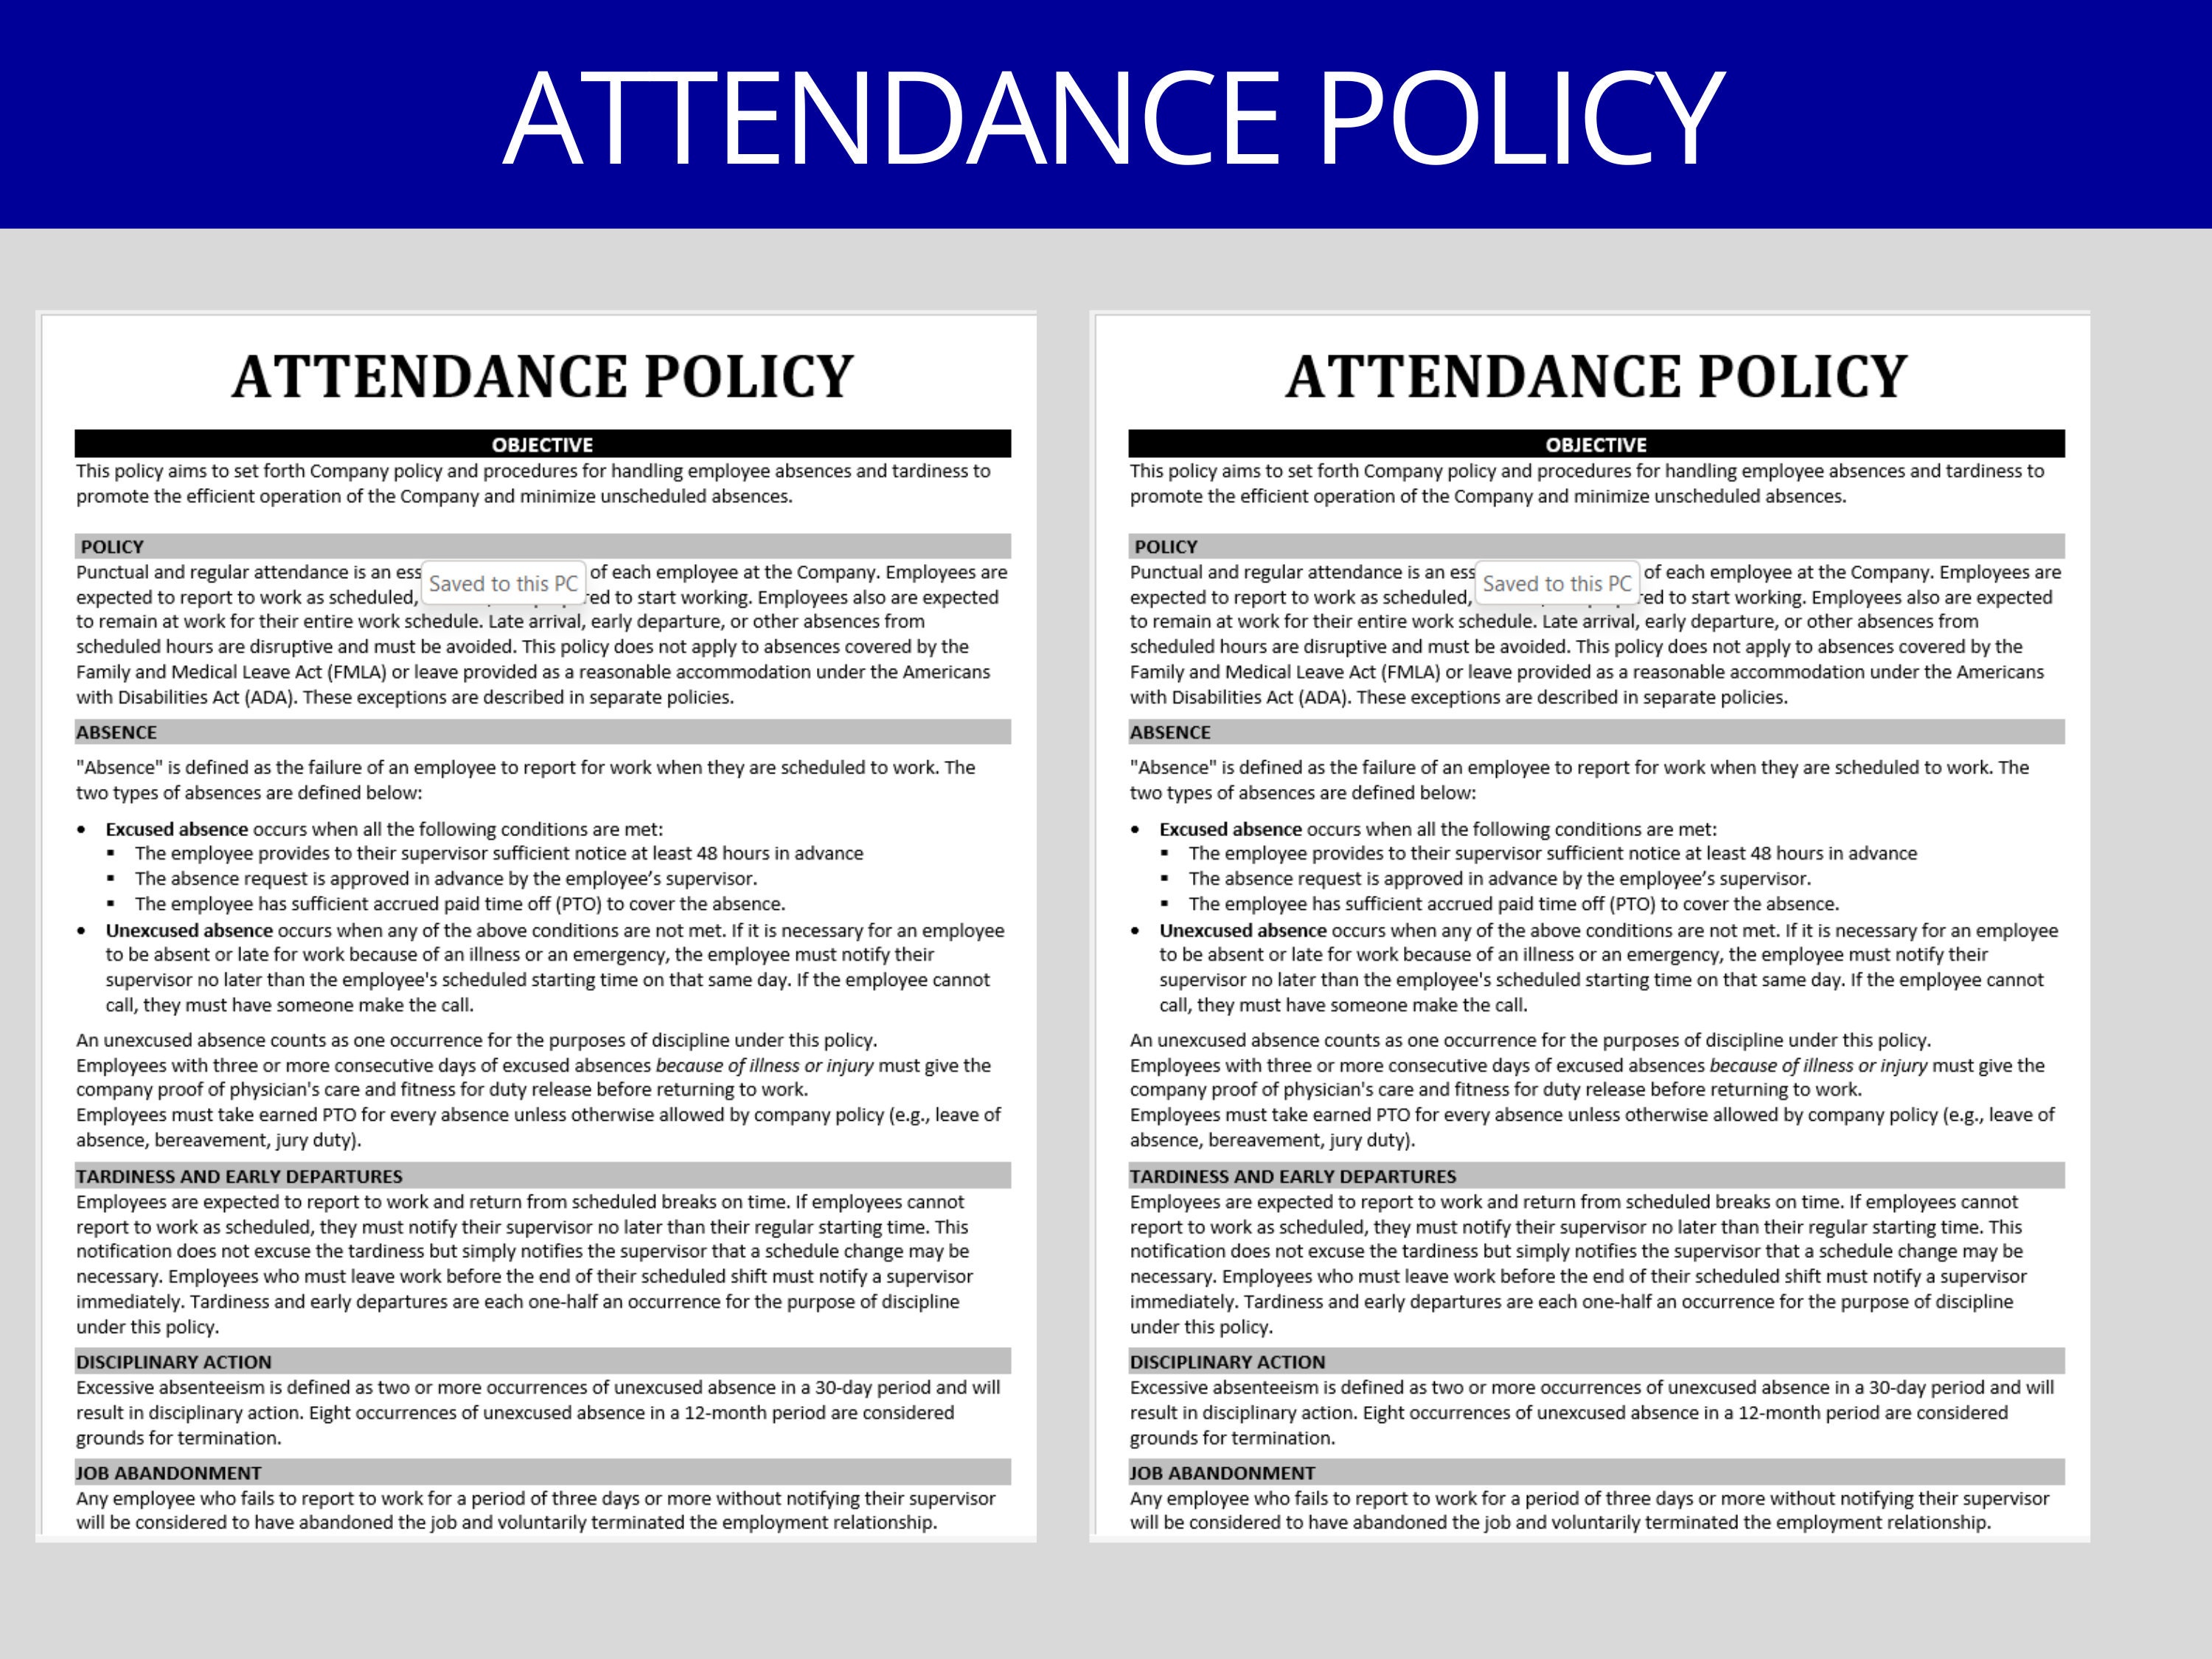 How an attendance policy brought the U.S. to the brink of a